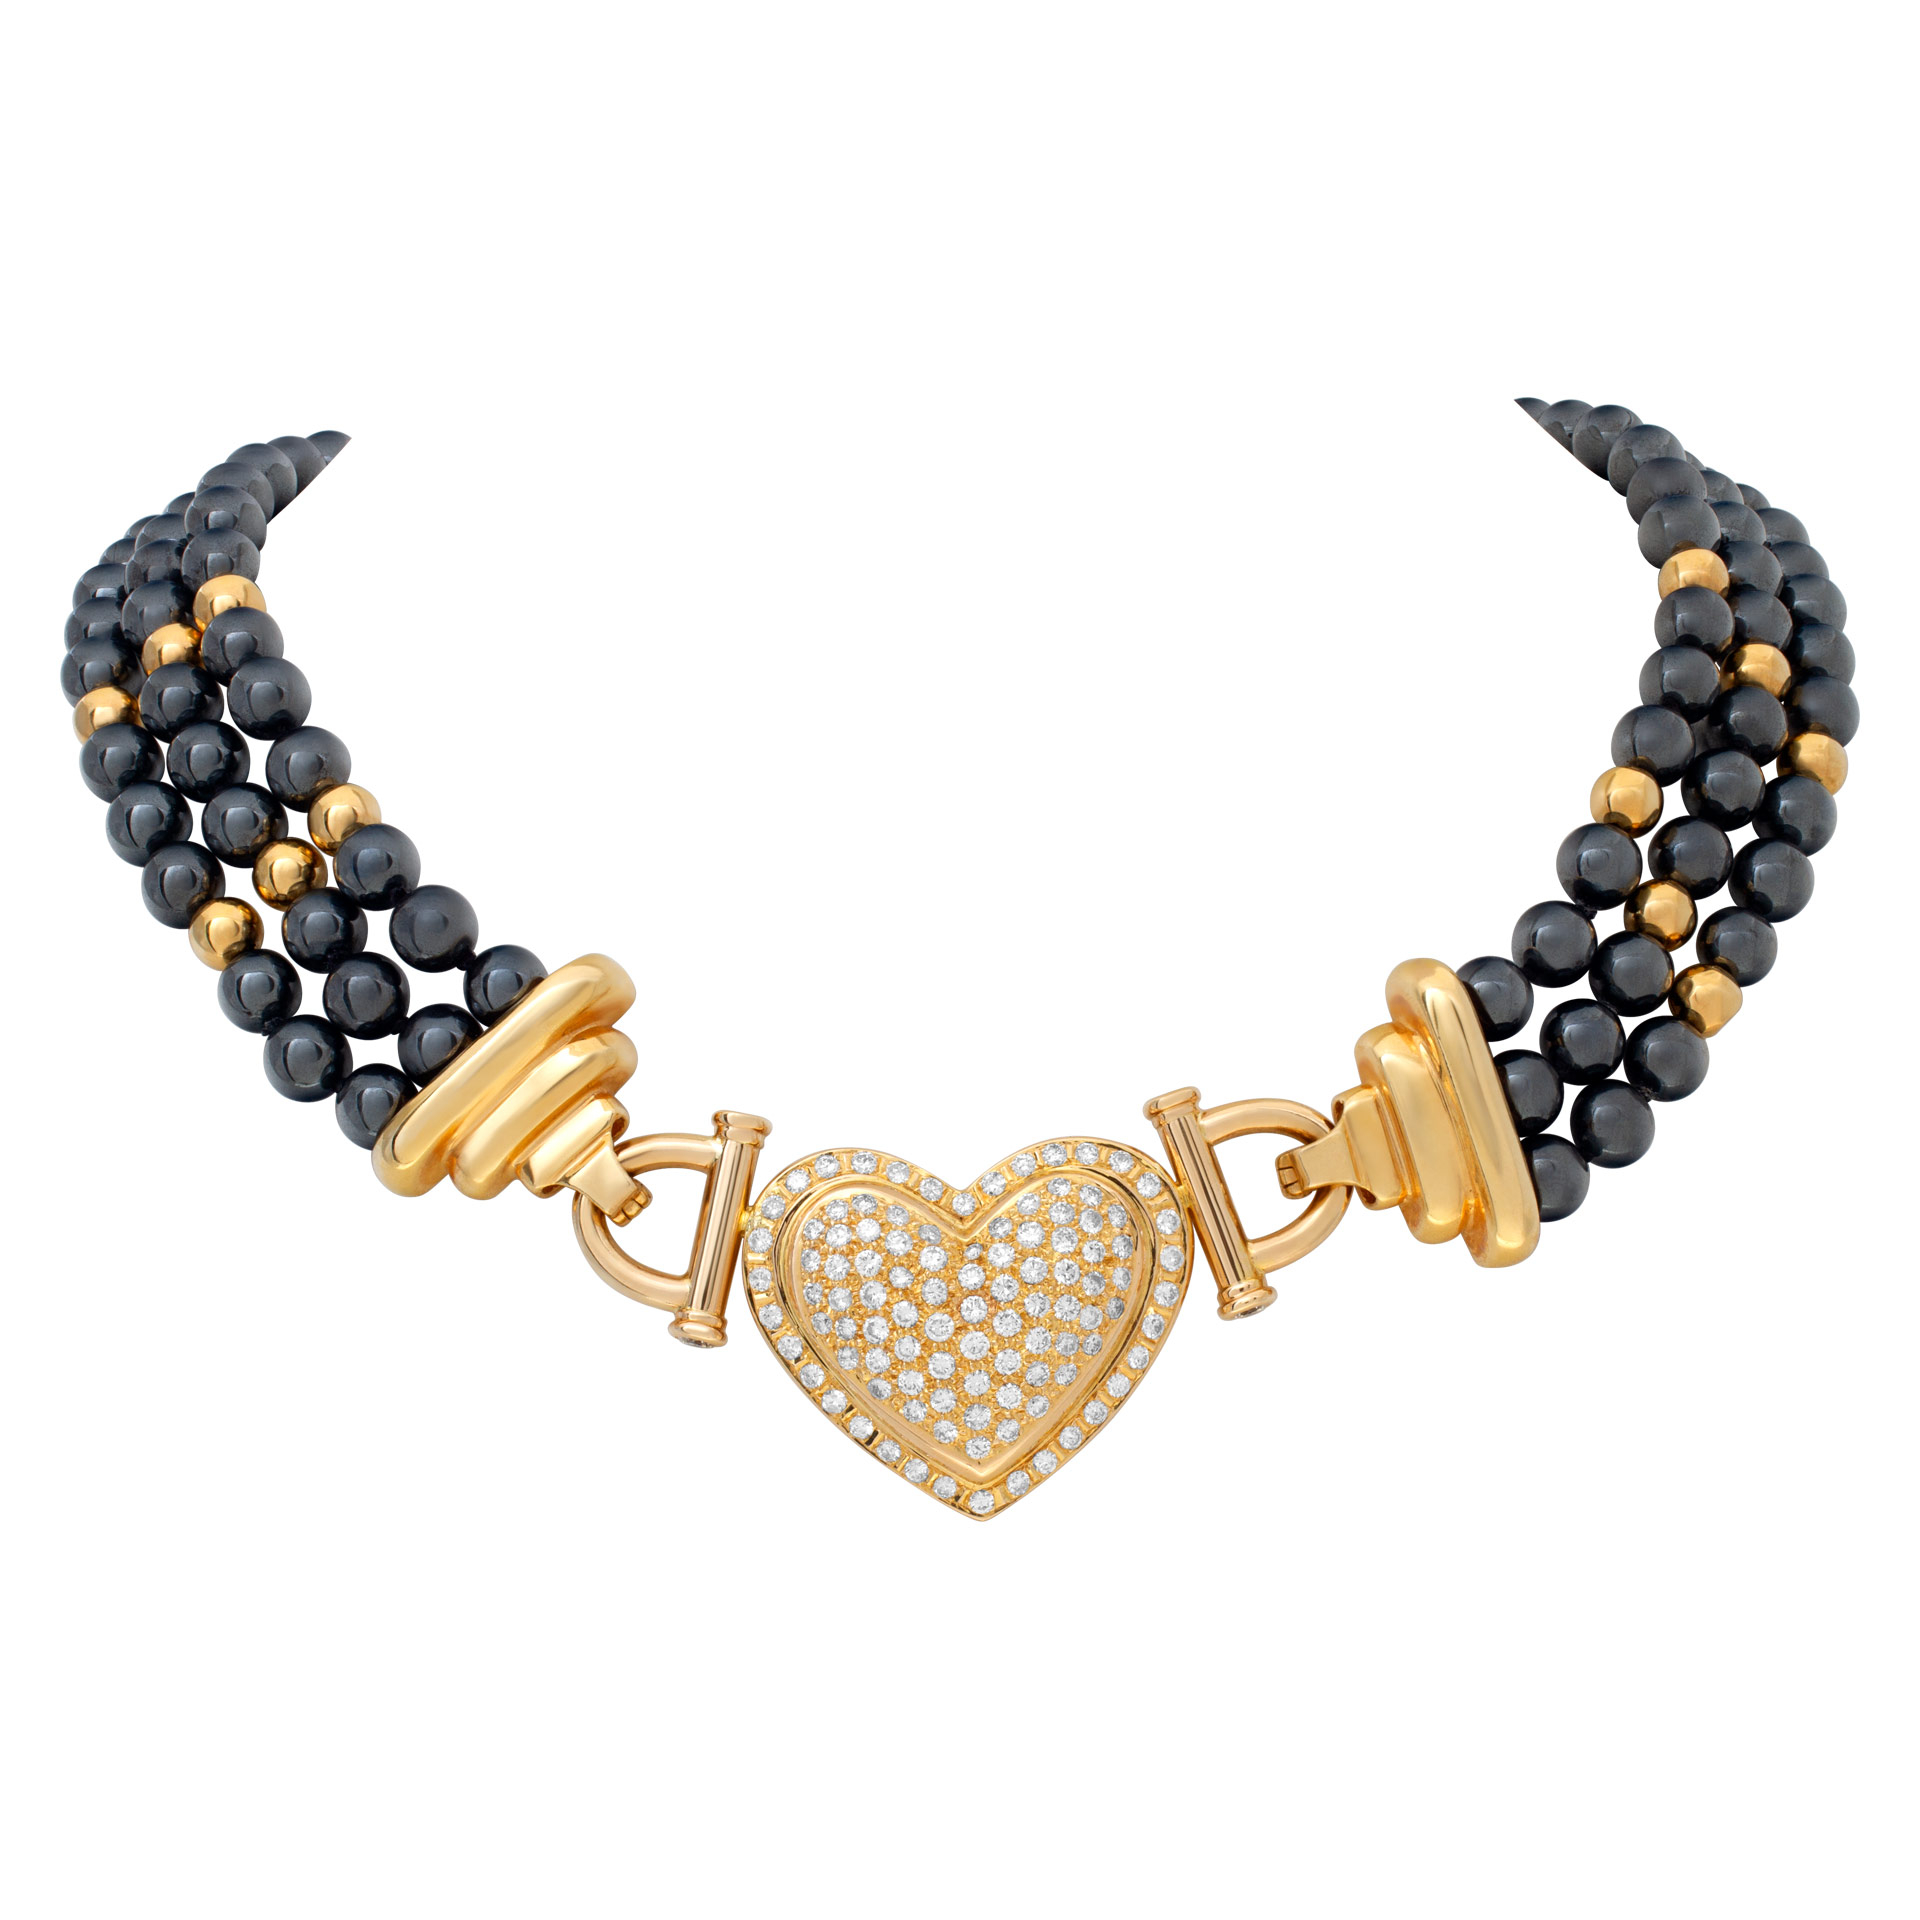 Hematite beads necklace with removable diamond heart center in 14k. image 1